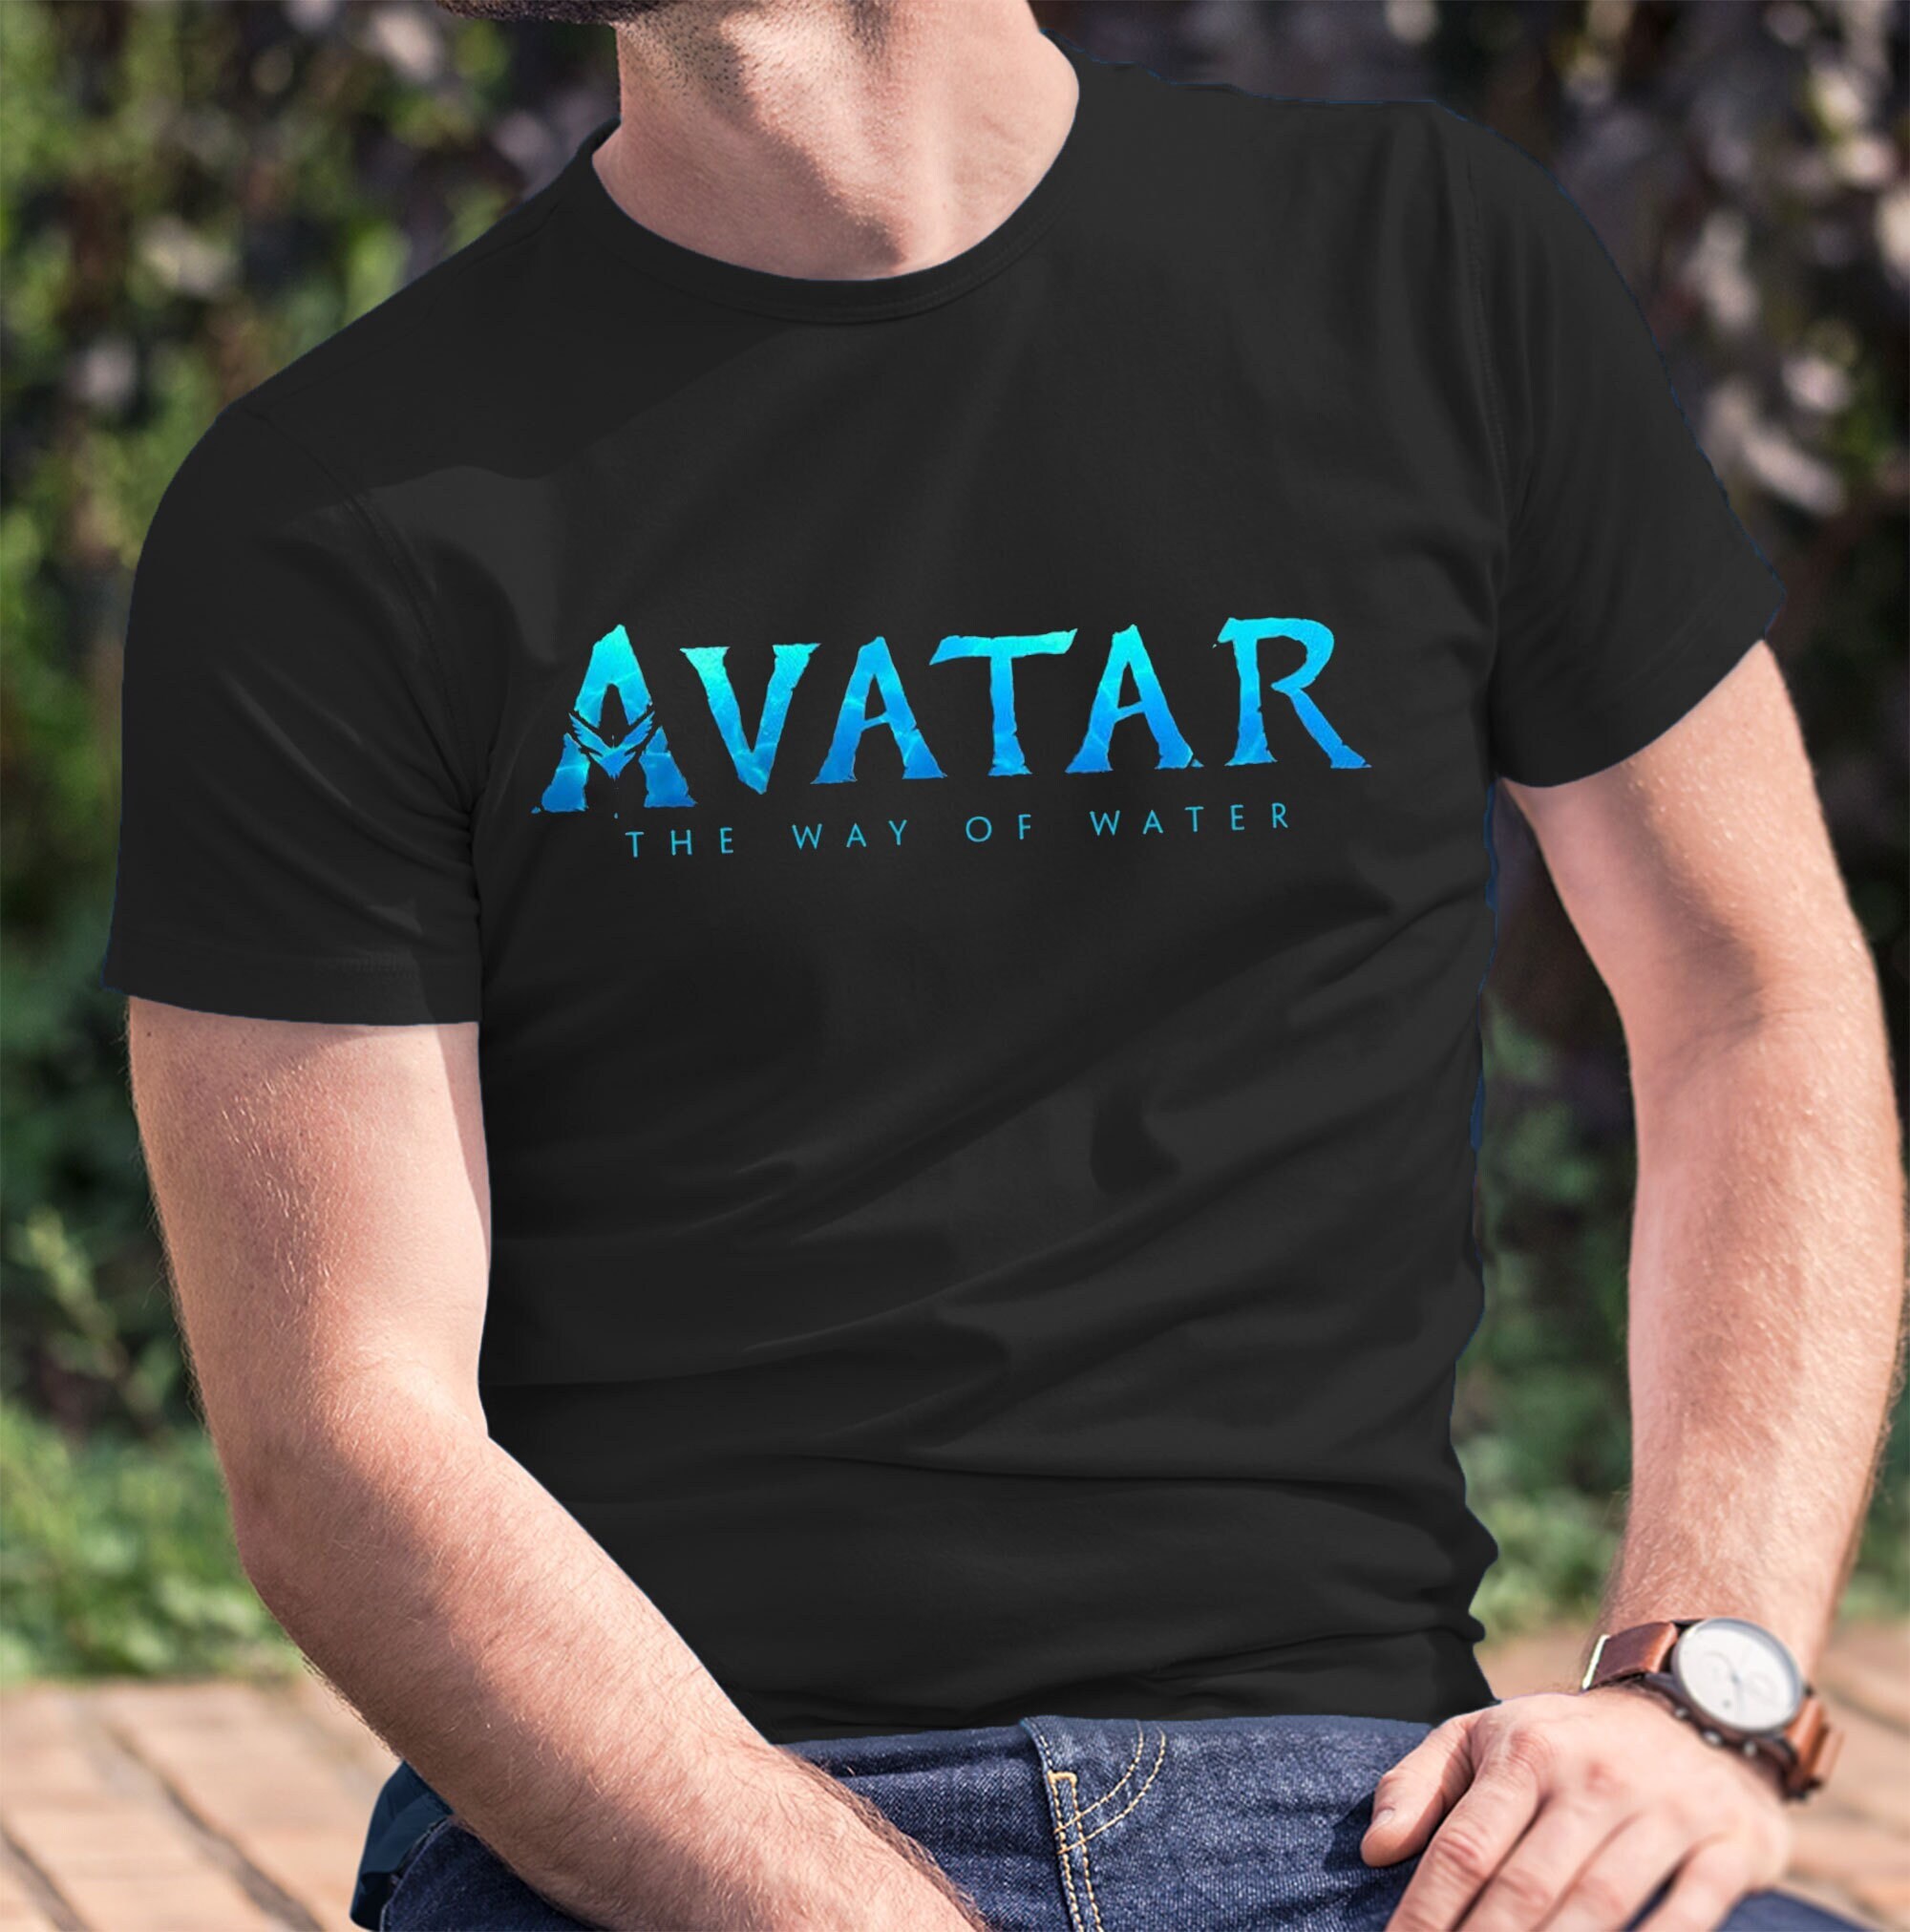 Discover Maglietta T-Shirt Avatar Uomo Donna Bambini Movie Vintage Avatar The Way Of Water